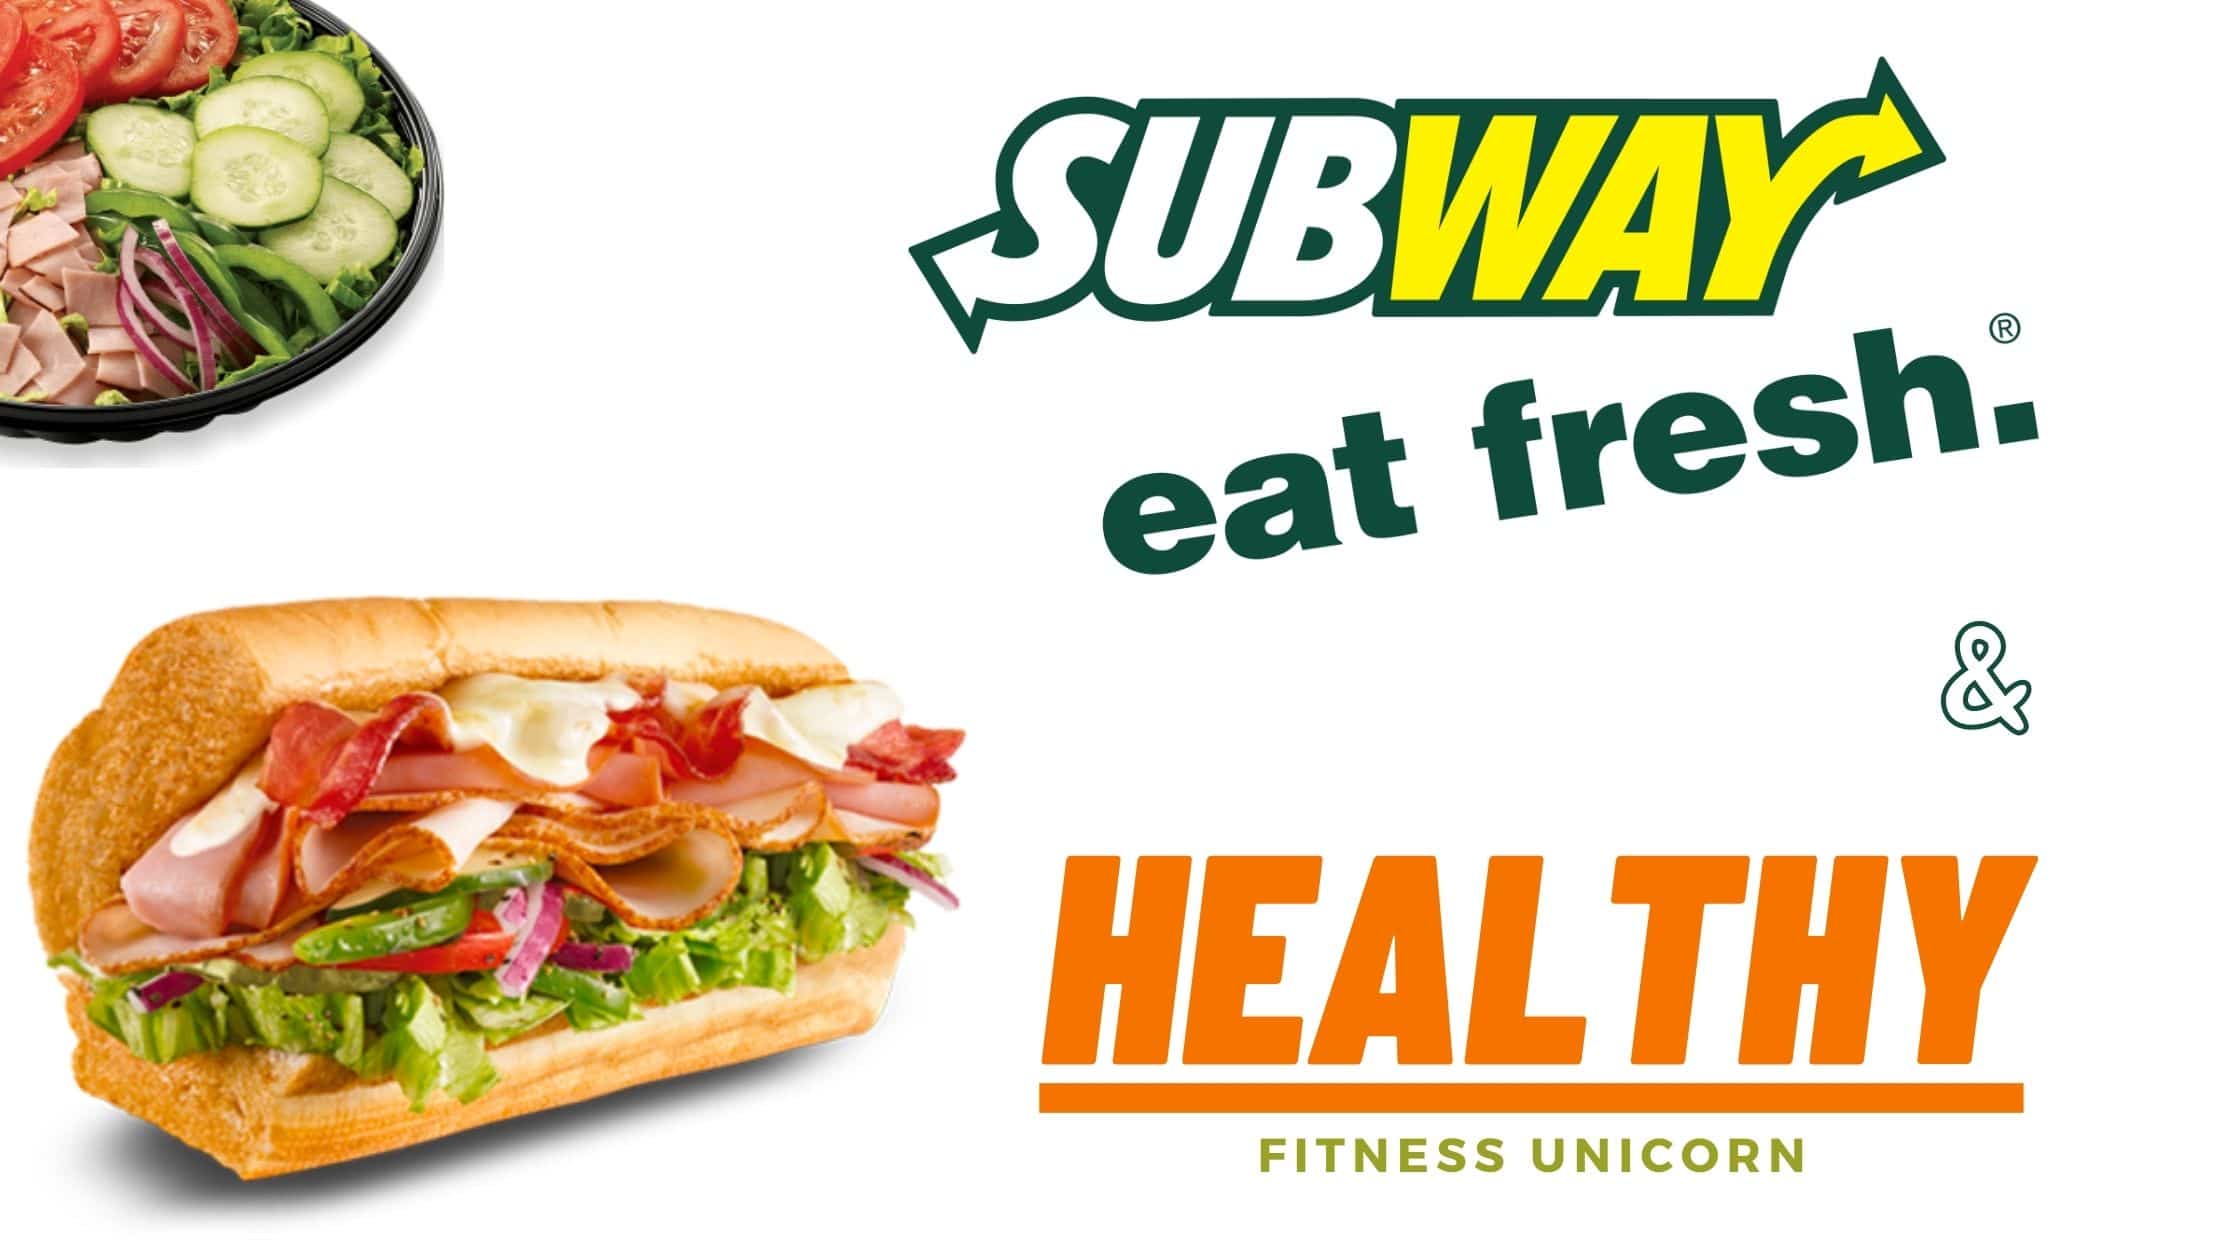 is subway sandwich good for weight loss